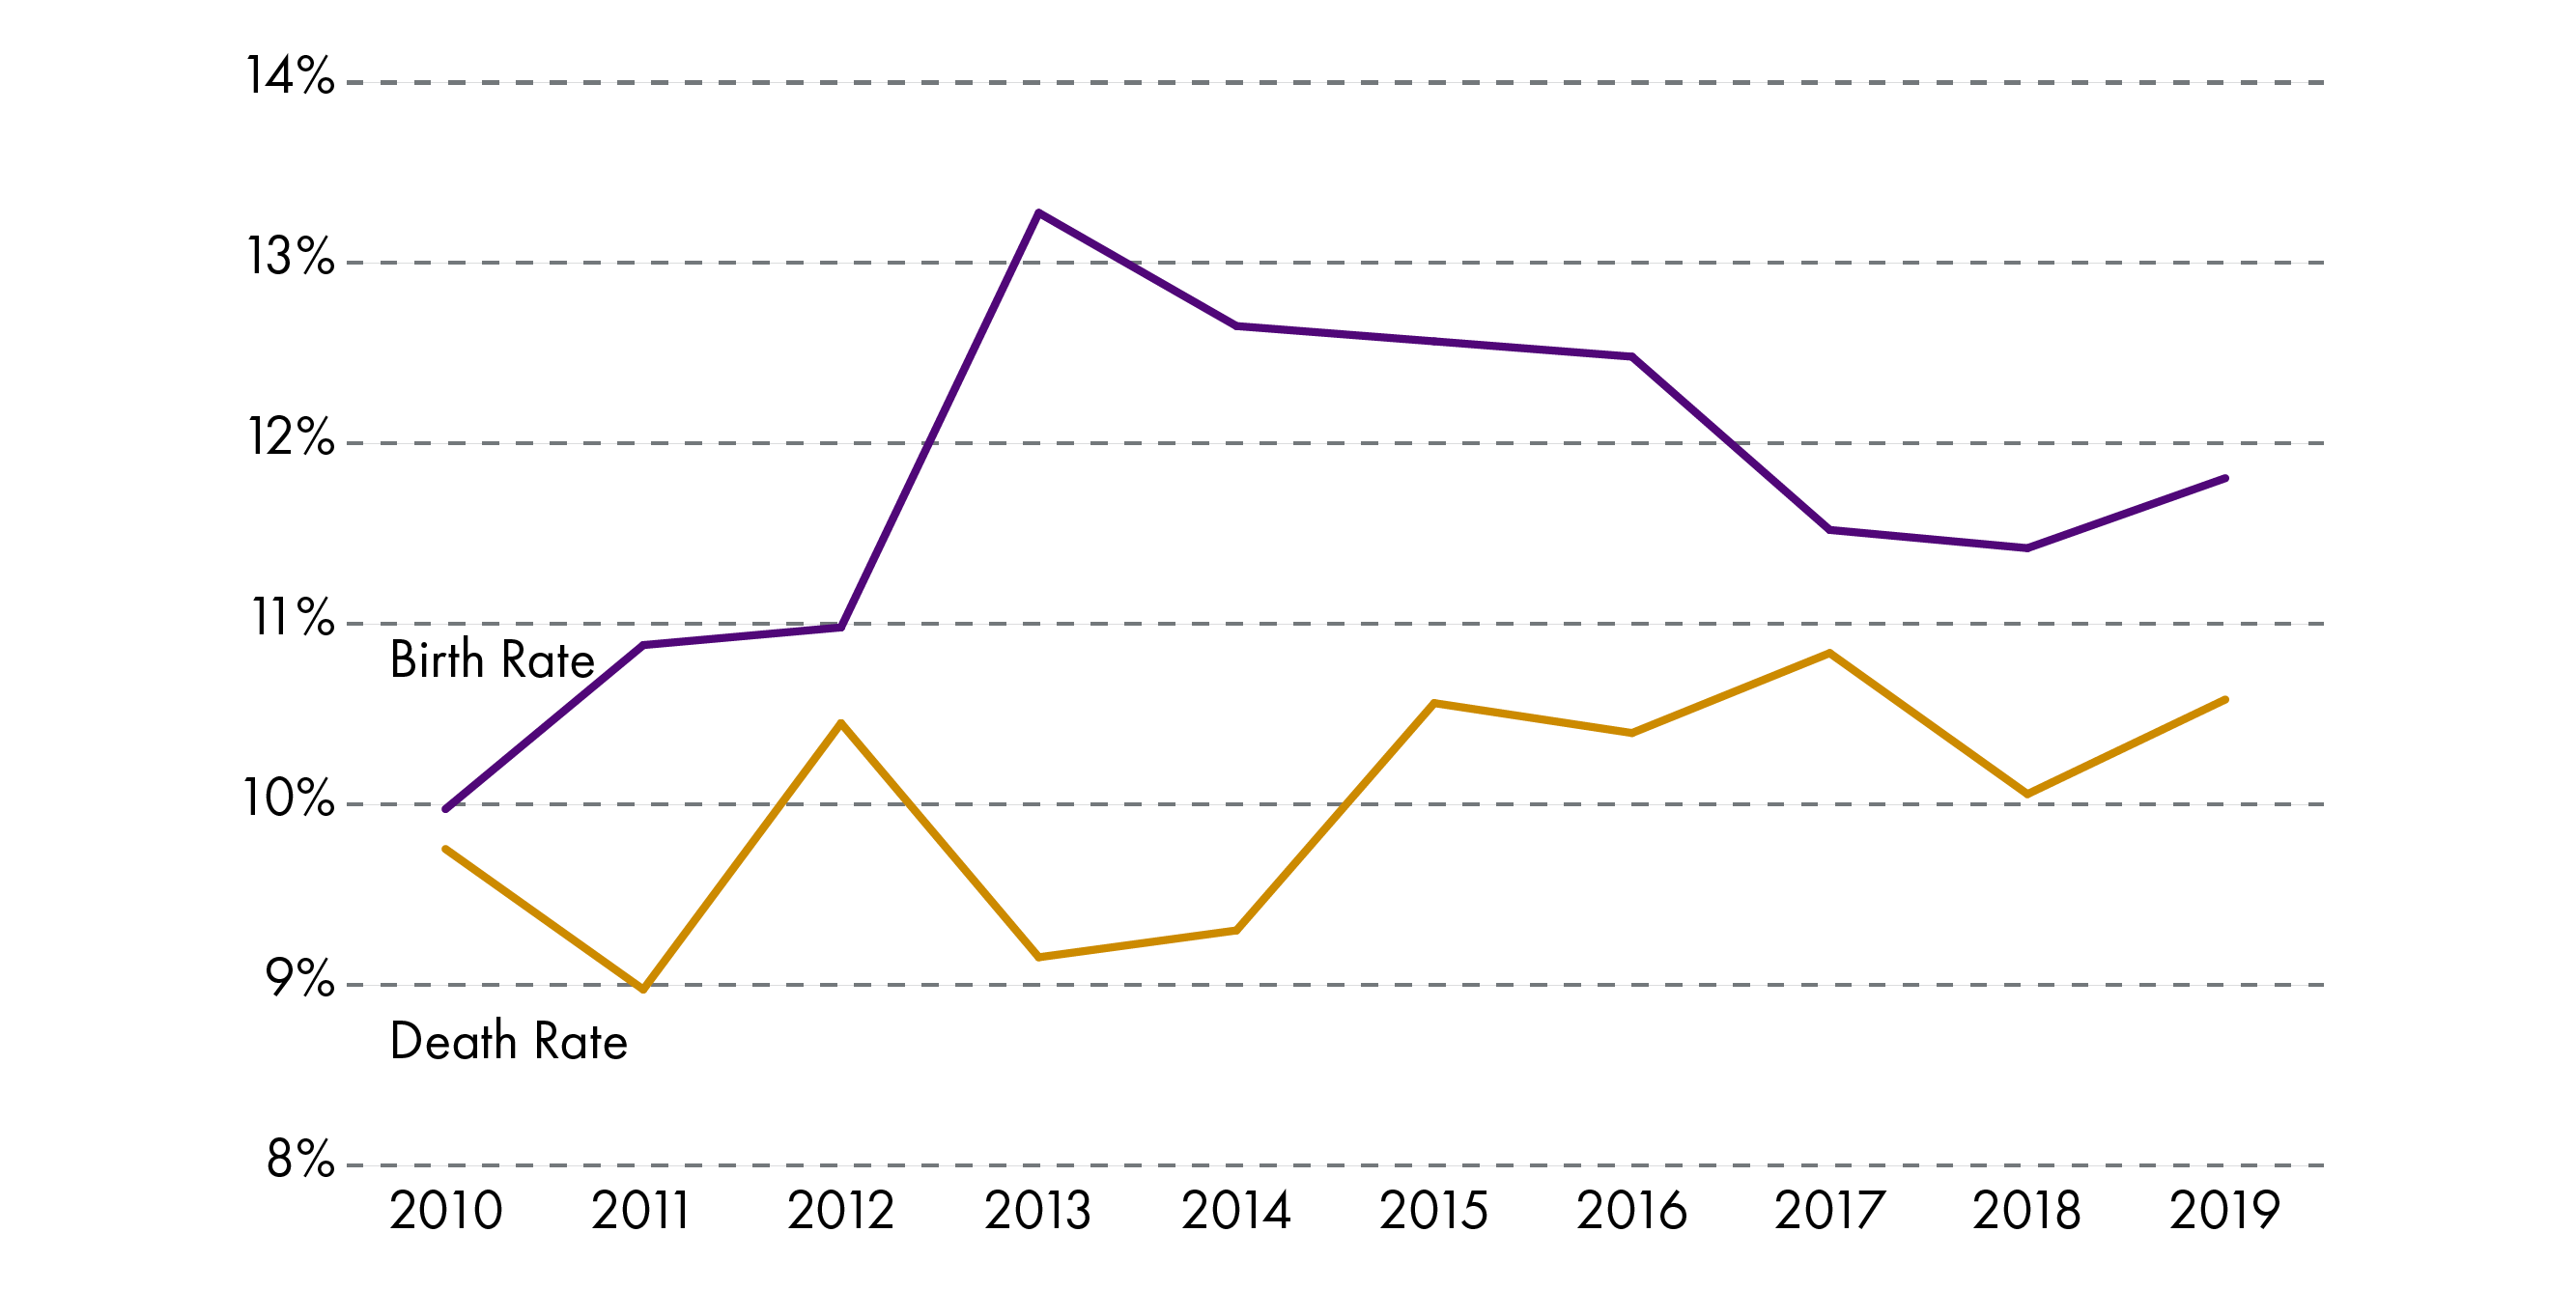 Scottish birth and death rates over the 2010 to 2019 period with a varying gap.